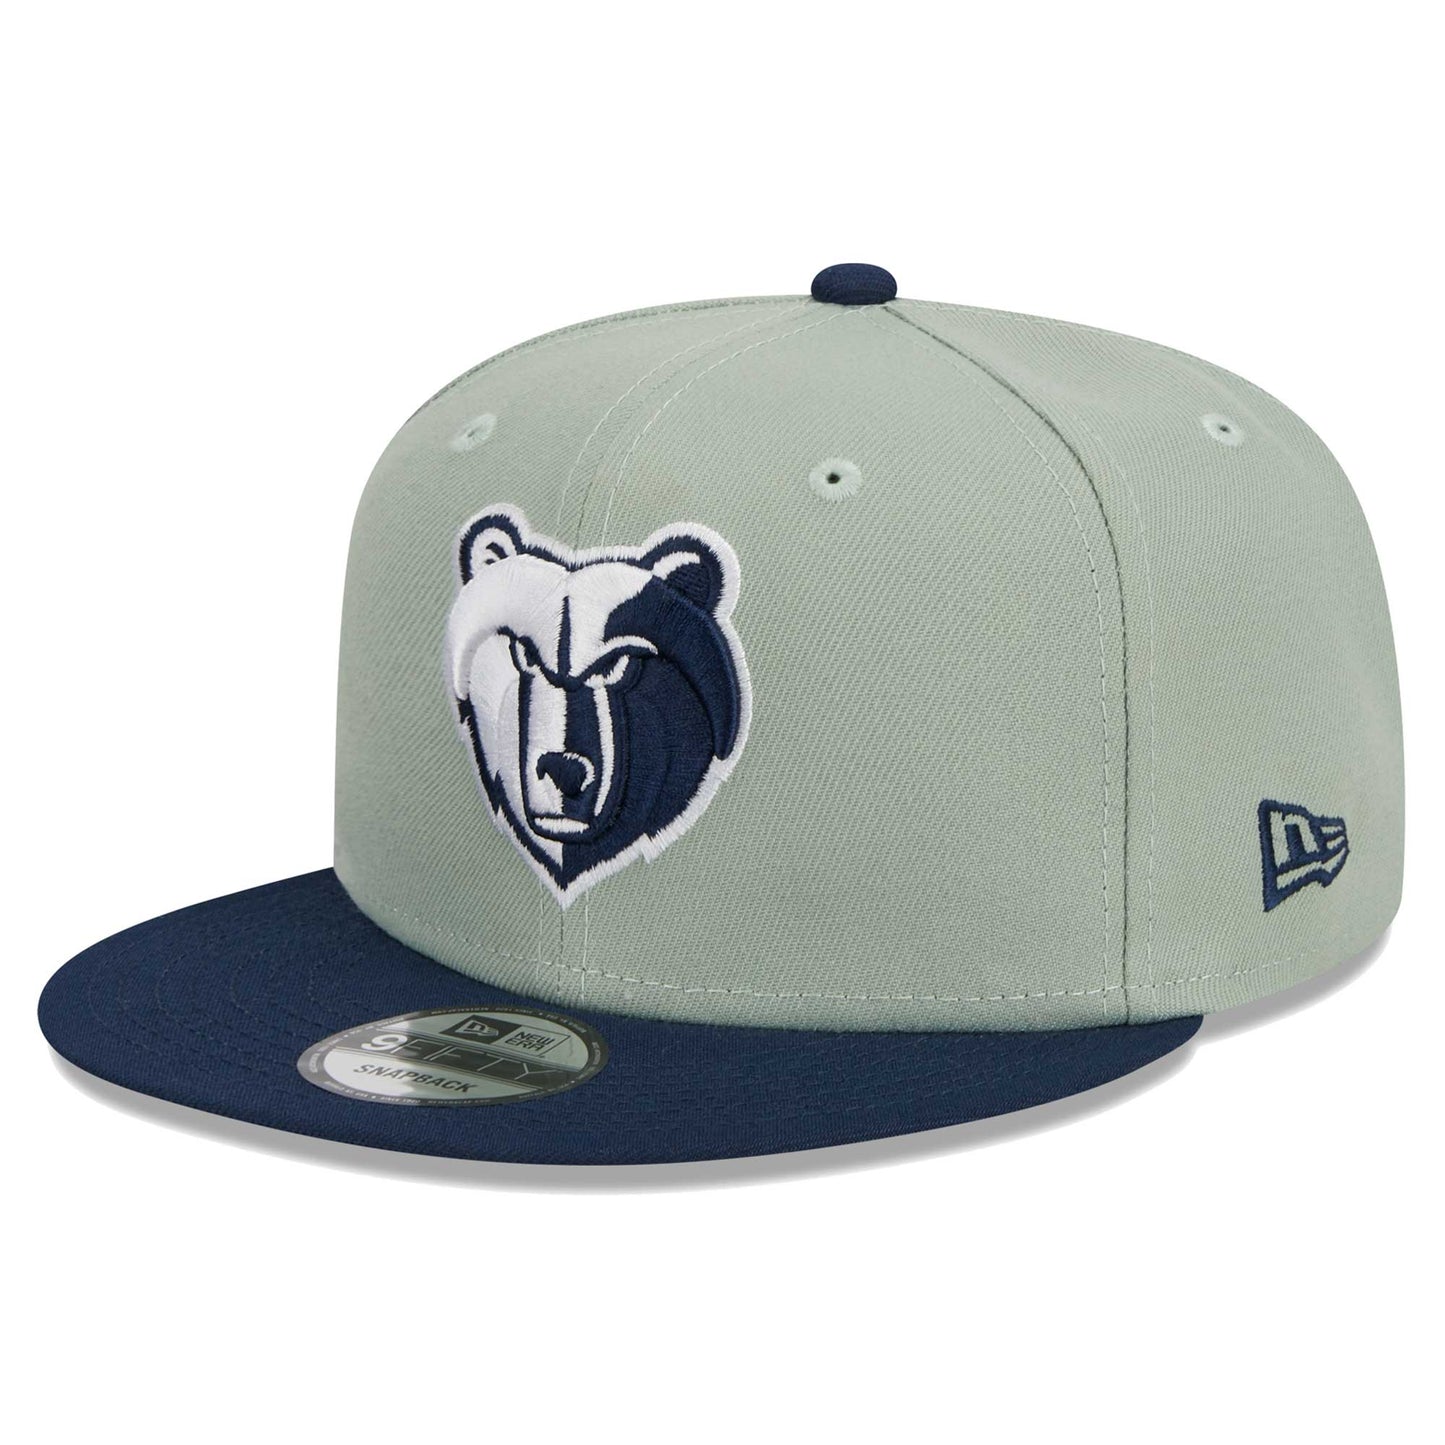 Memphis Grizzlies New Era Two-Tone Color Pack 9FIFTY Snapback Hat - Sage/Navy